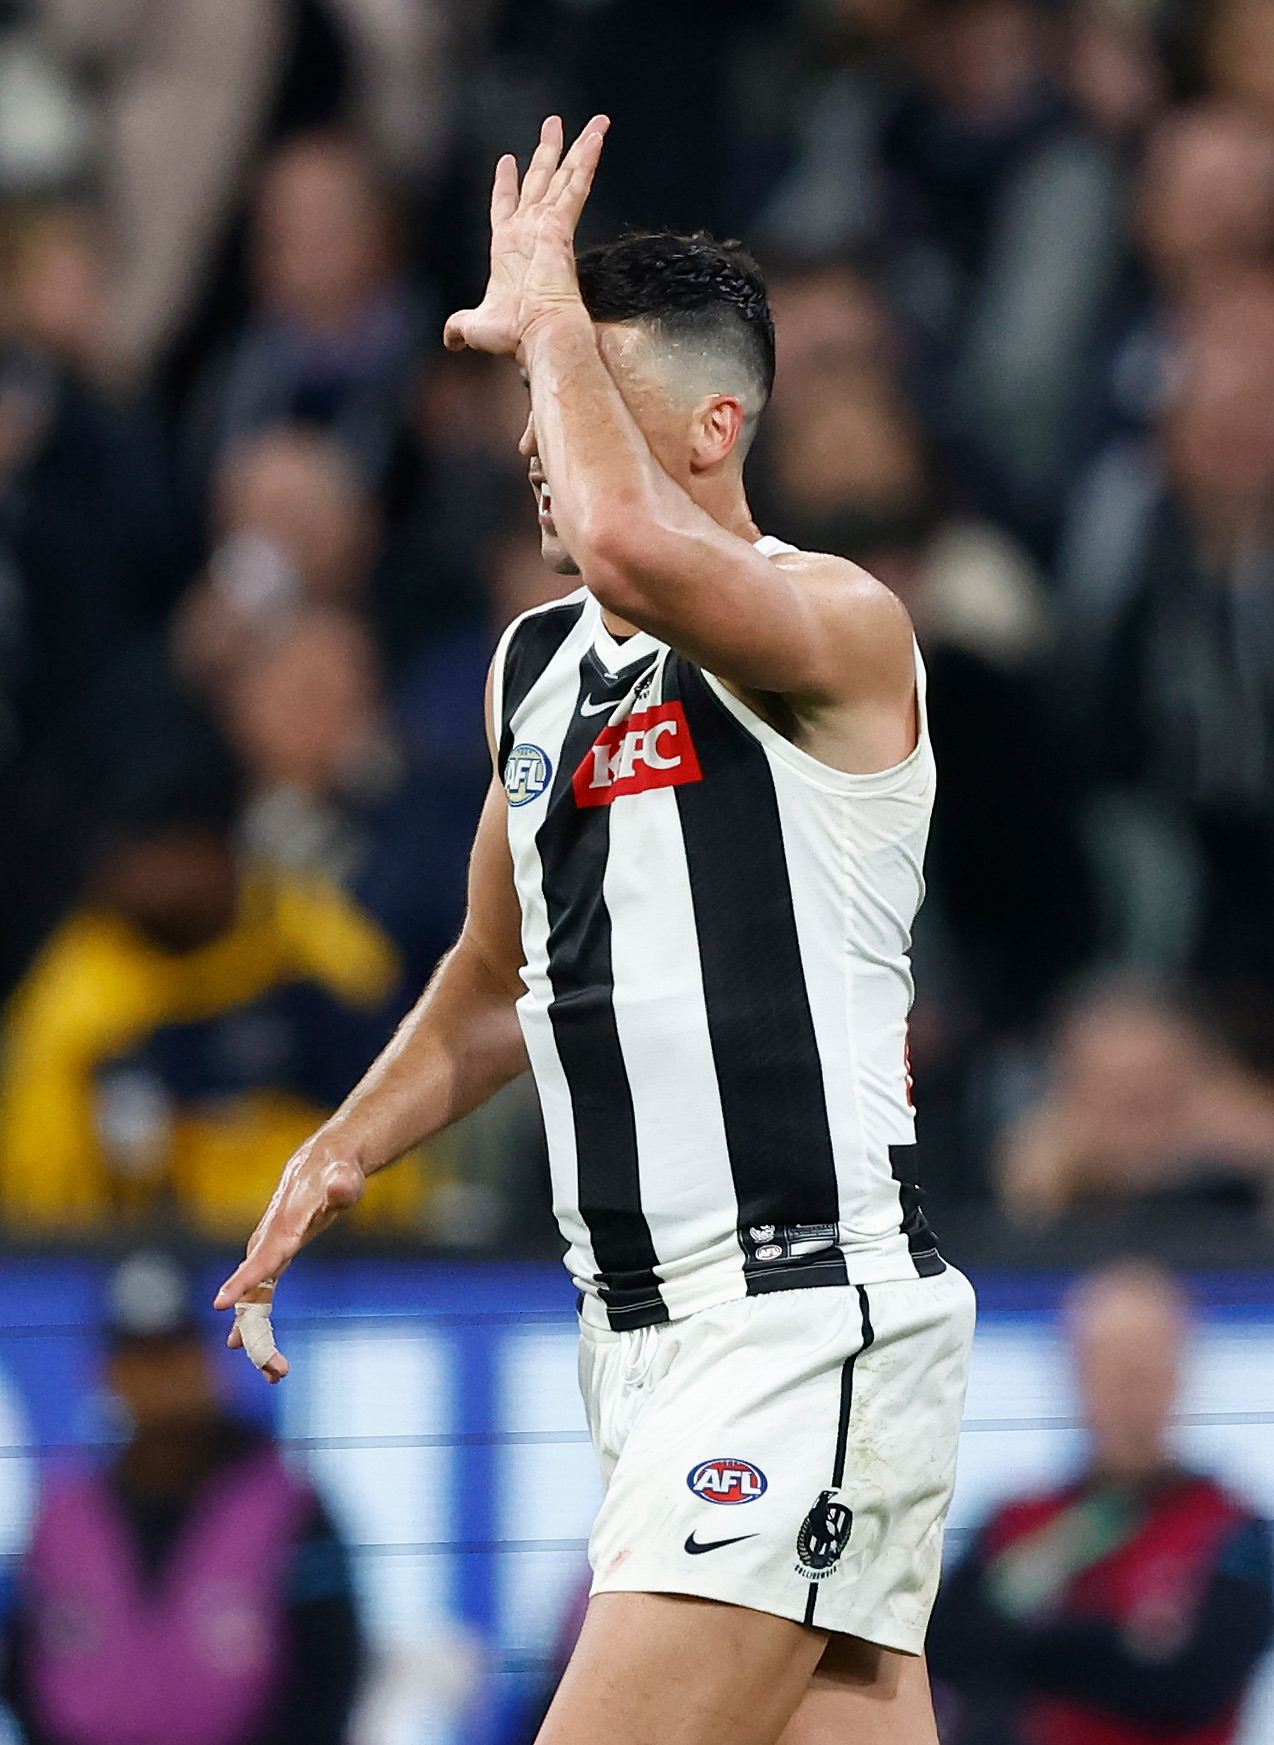 Pendlebury is just five games away from 400.